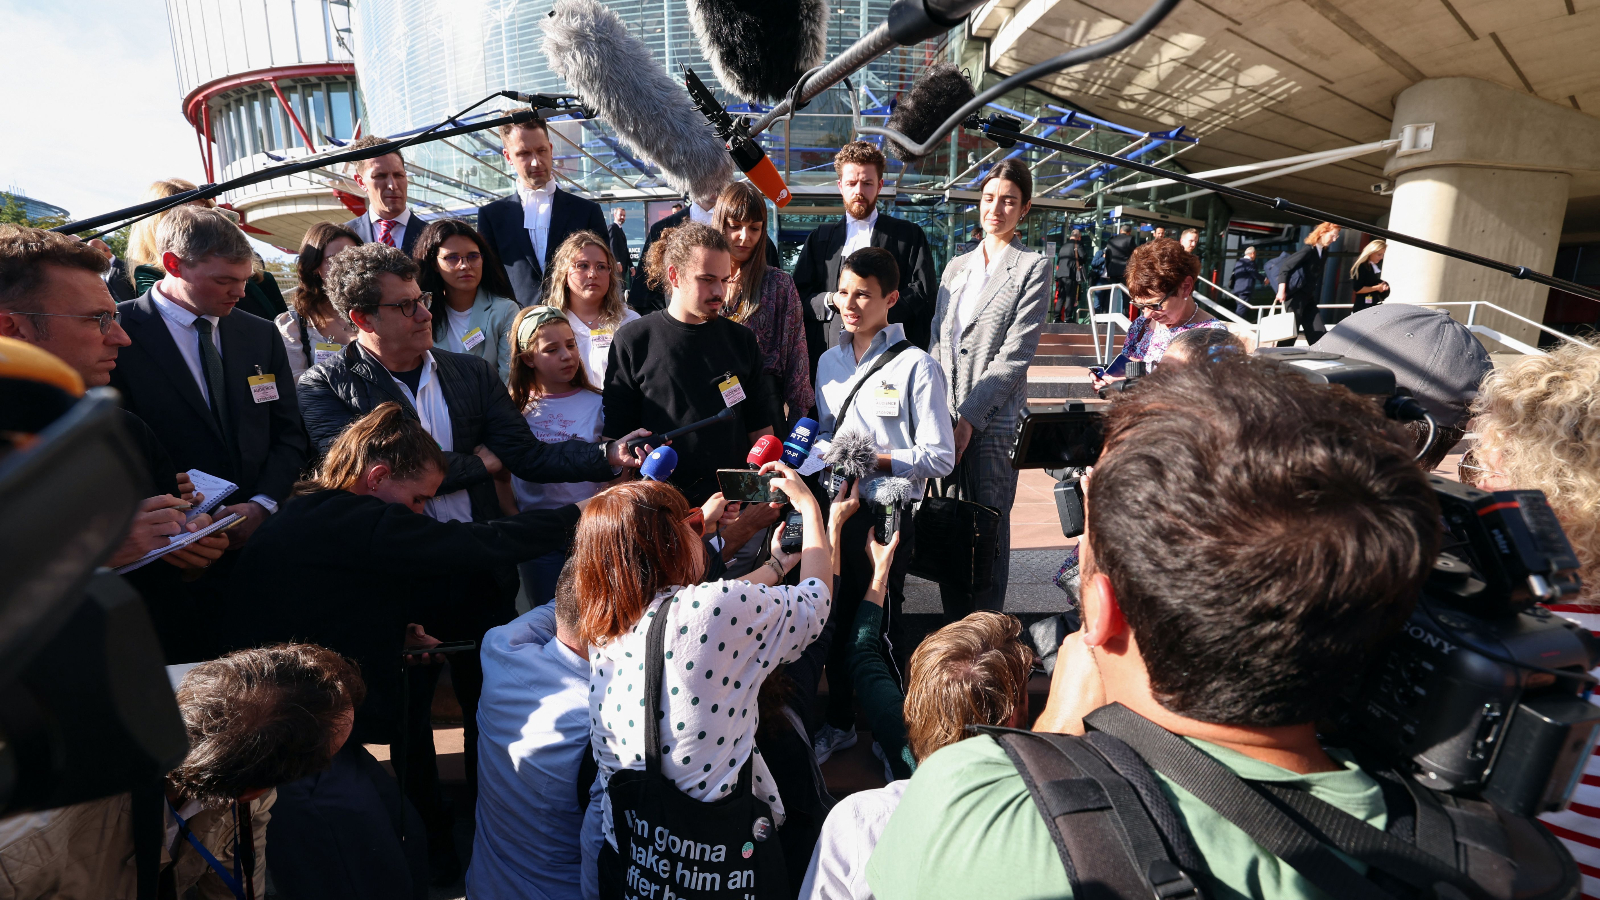 Young Portuguese citizens address media outside the European Court of Human Rights (ECHR) after a hearing in a climate change case involving themselves against 32 countries, in Strasbourg, eastern France, on September 27, 2023.